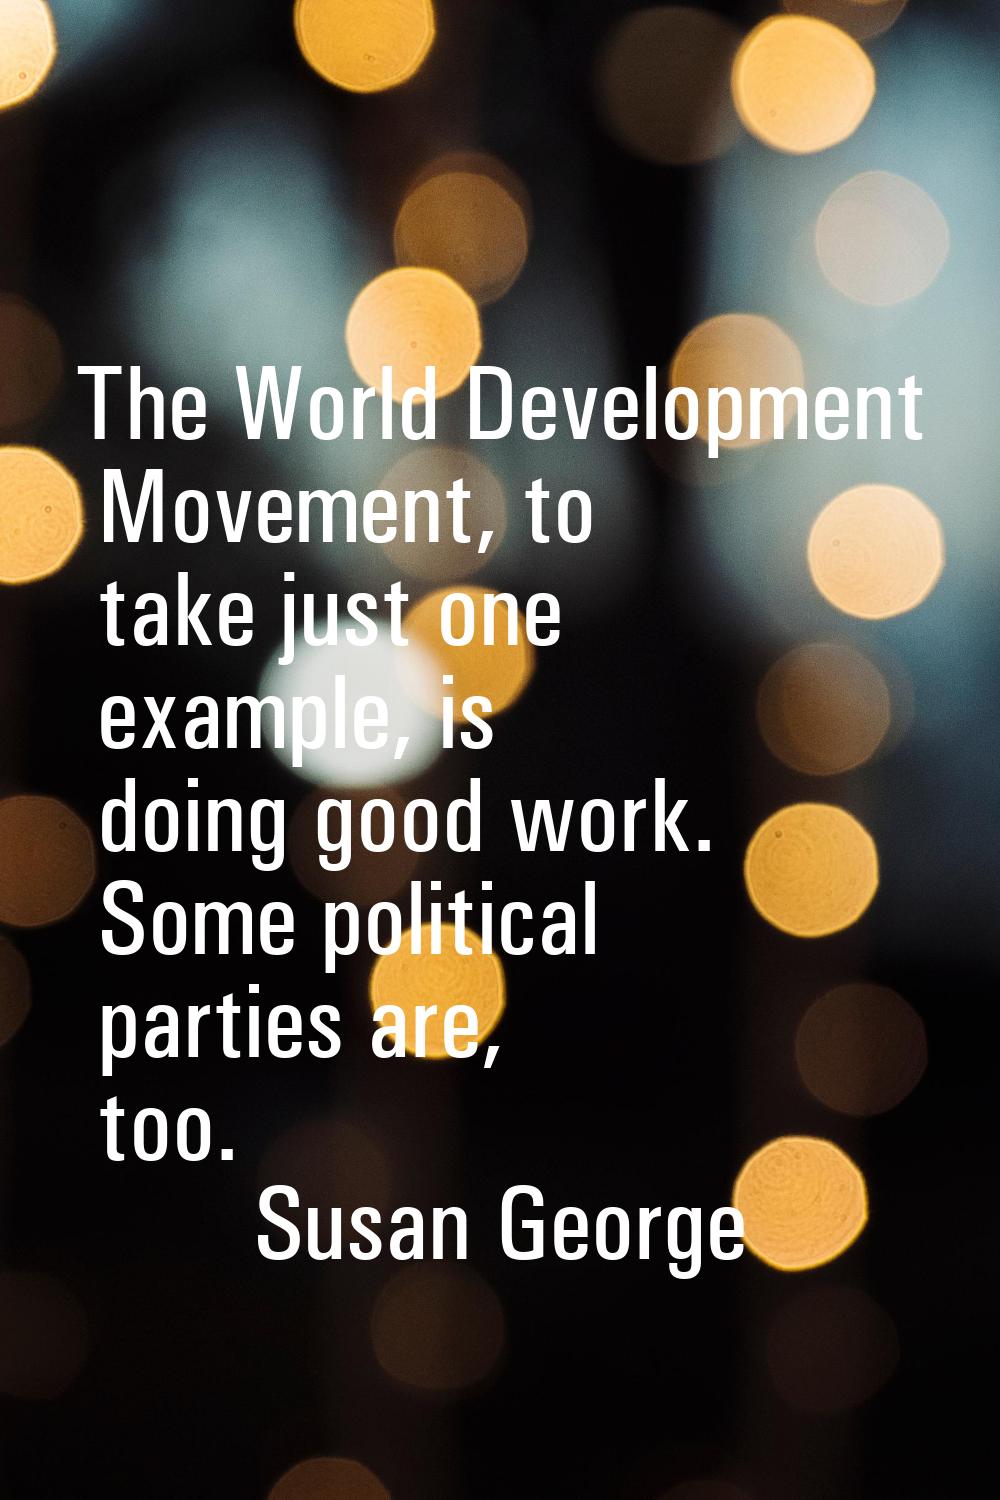 The World Development Movement, to take just one example, is doing good work. Some political partie